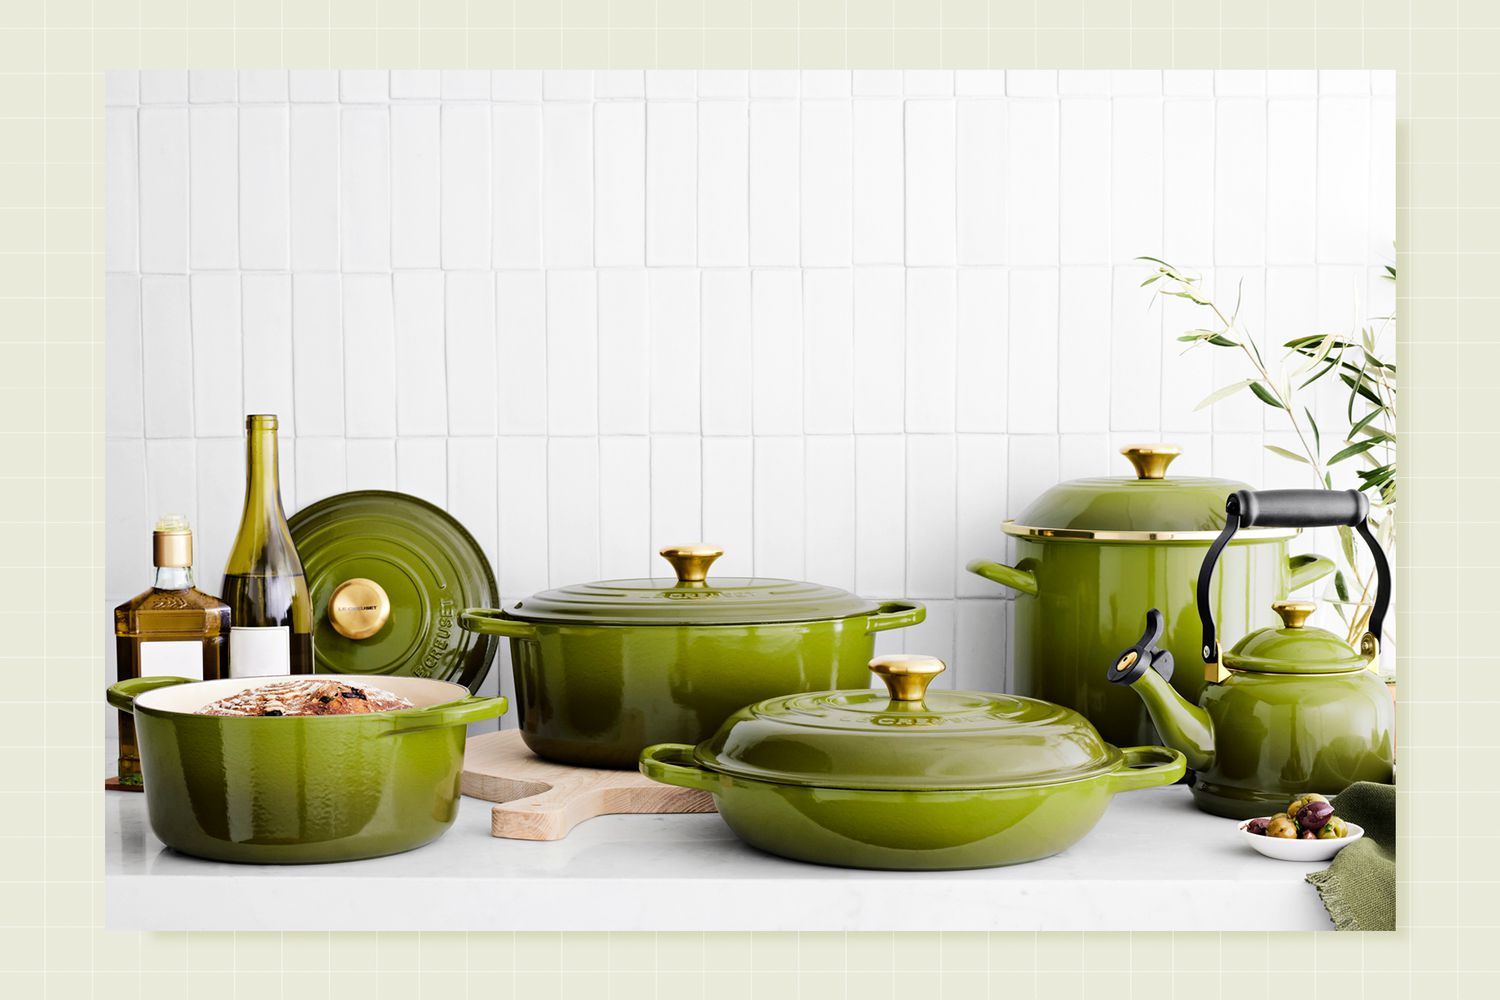 Williams Sonoma x Le Creuset Olive collection on a designed background